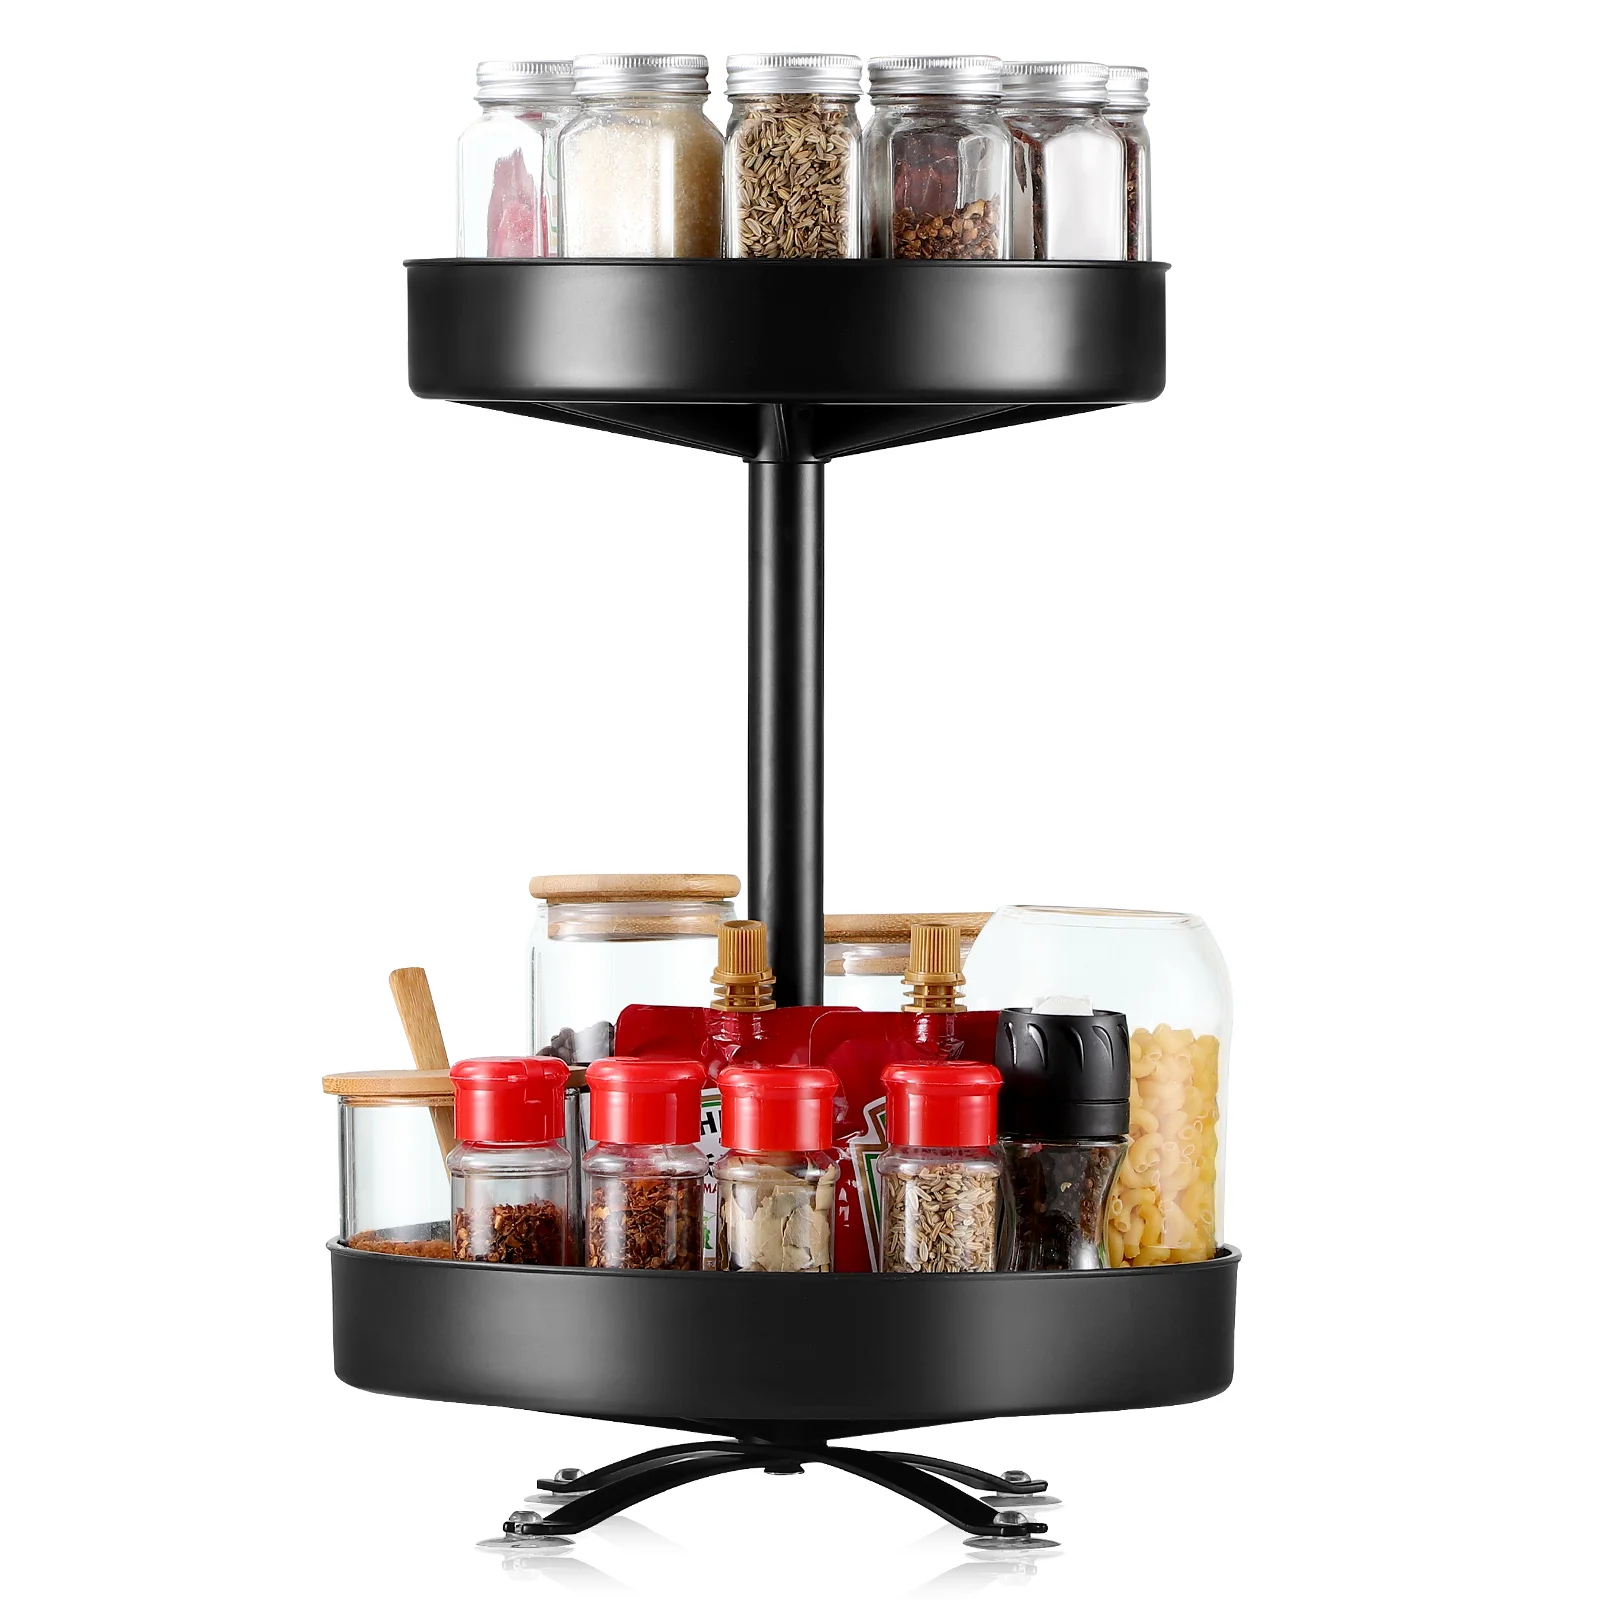 

Organizer Rack Turntable Condiment Storage Seasoning Rotating Kitchen Holder Tray Tier Bottle Cabinet Spices Containers Sauce